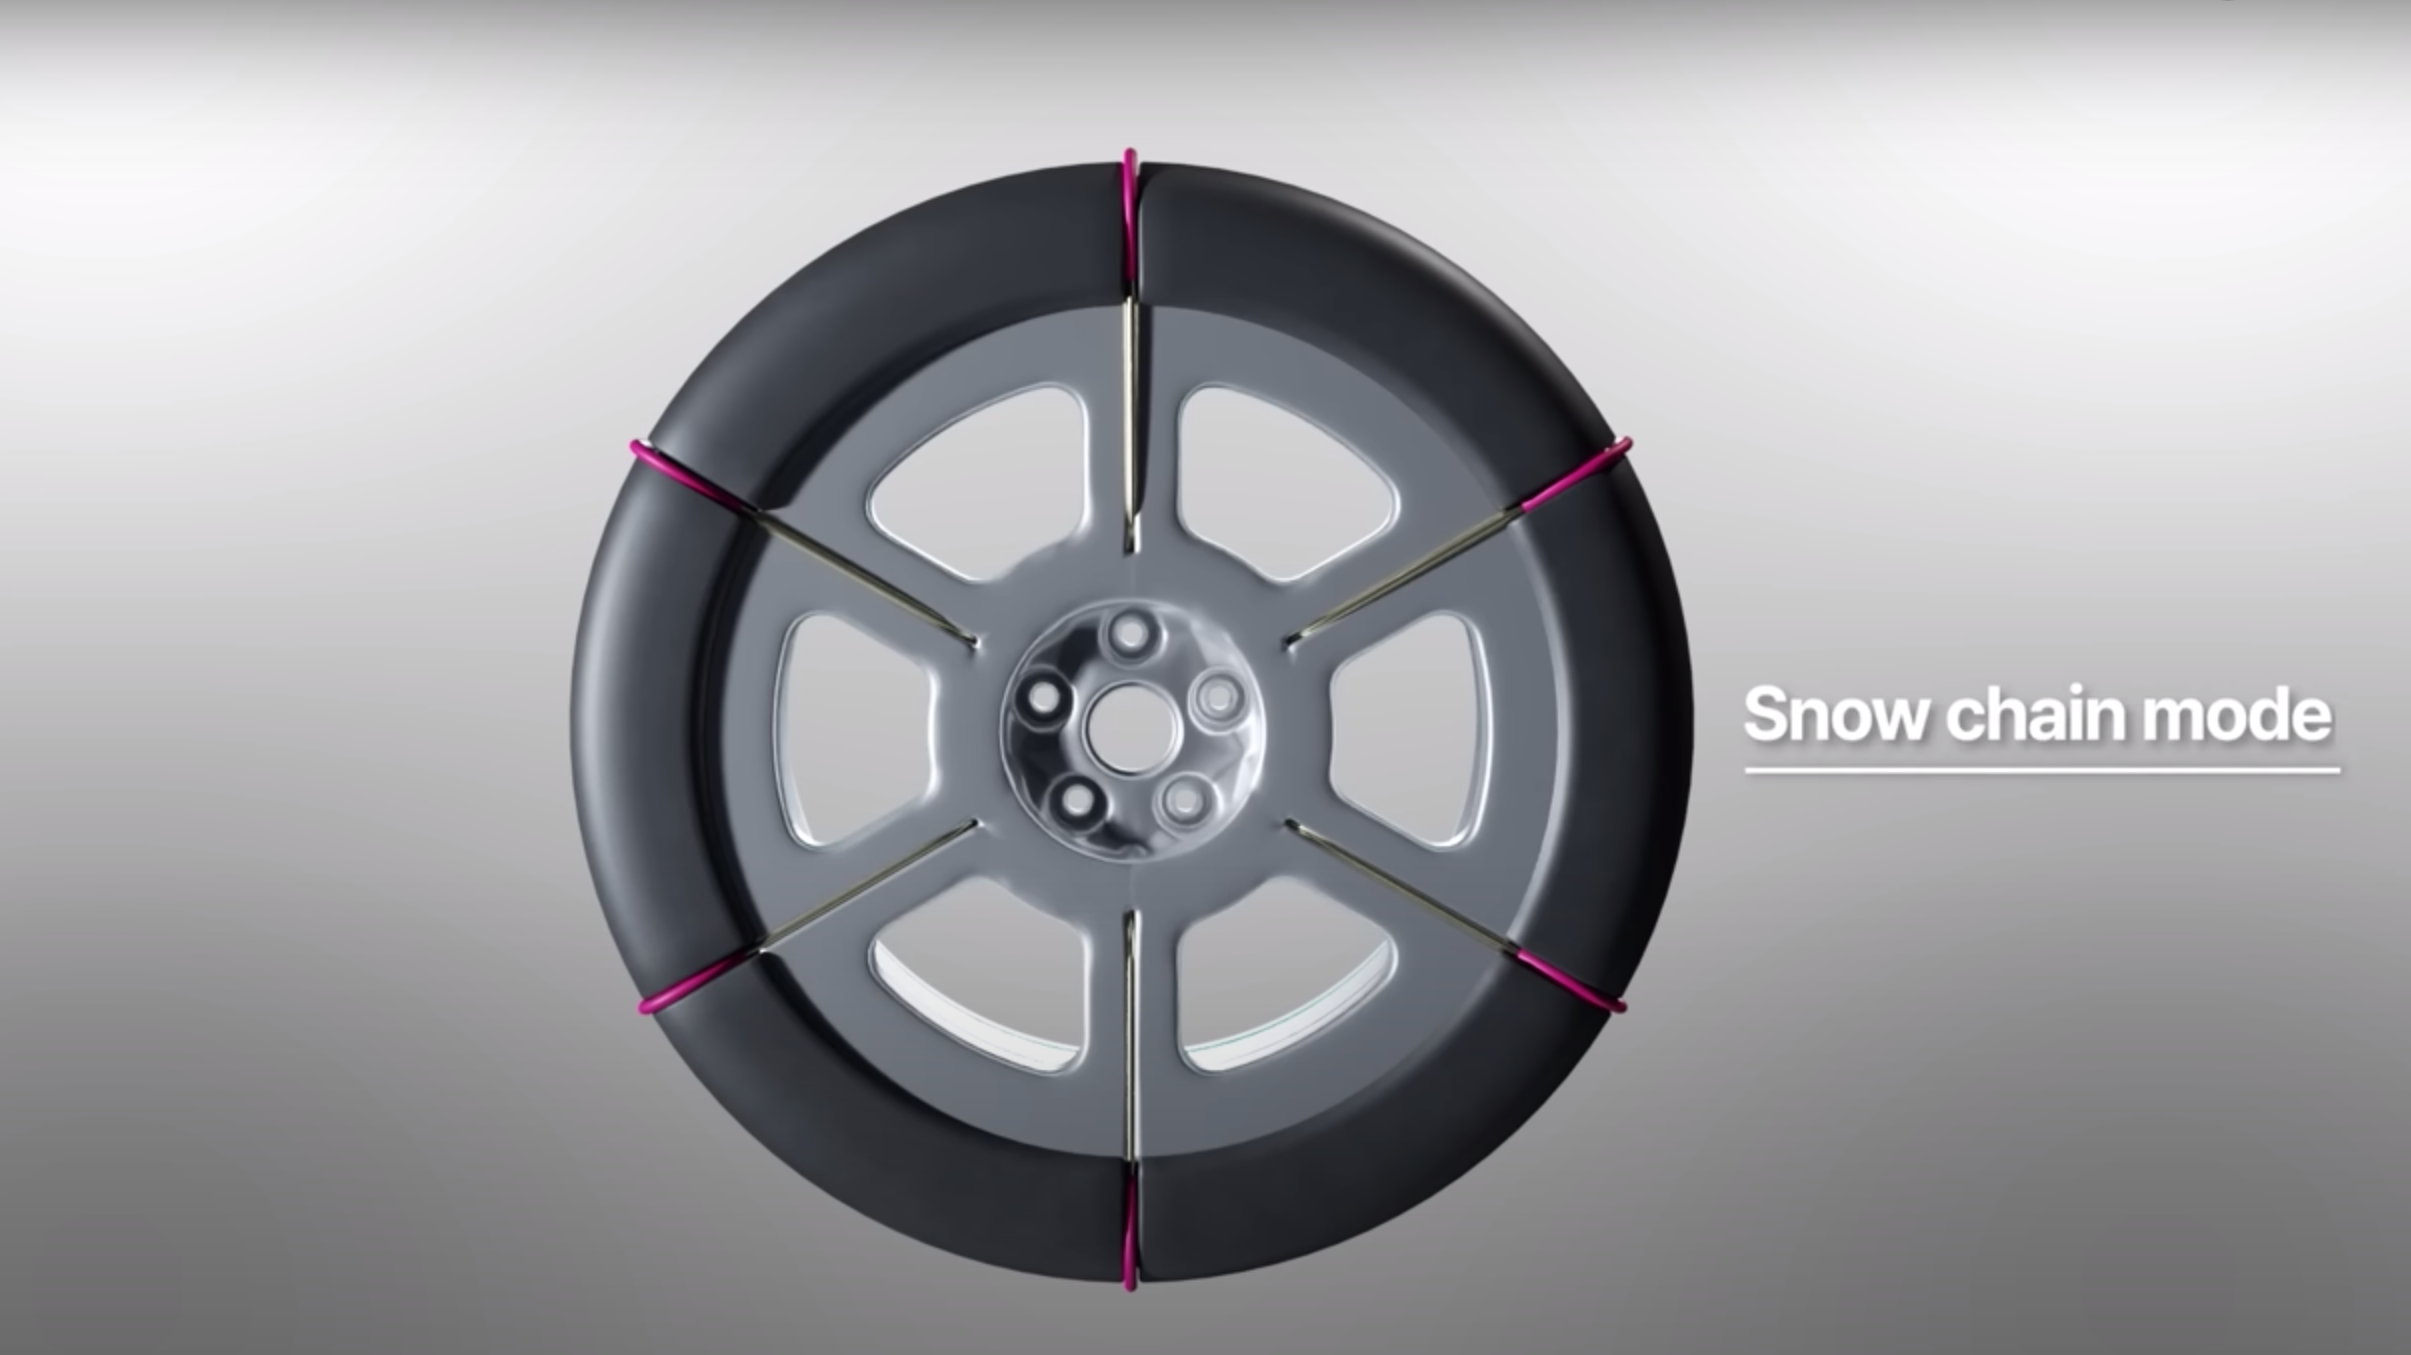 Hyundai's snow chain-integrated tire technology is winter-proof